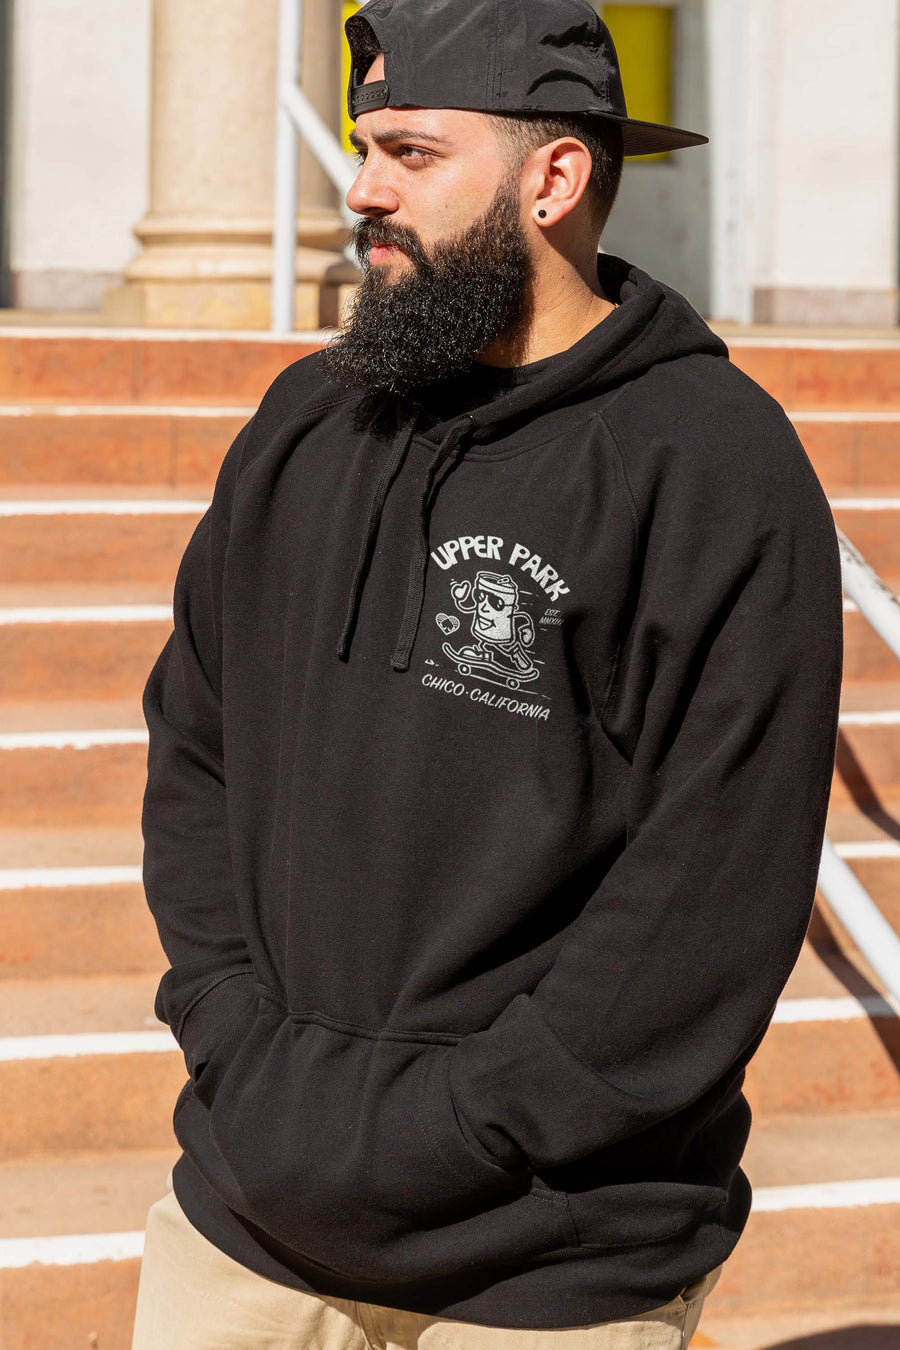 man standing in steps wearing a Corner Store Connoisseur hoodie from Upper Park Clothing